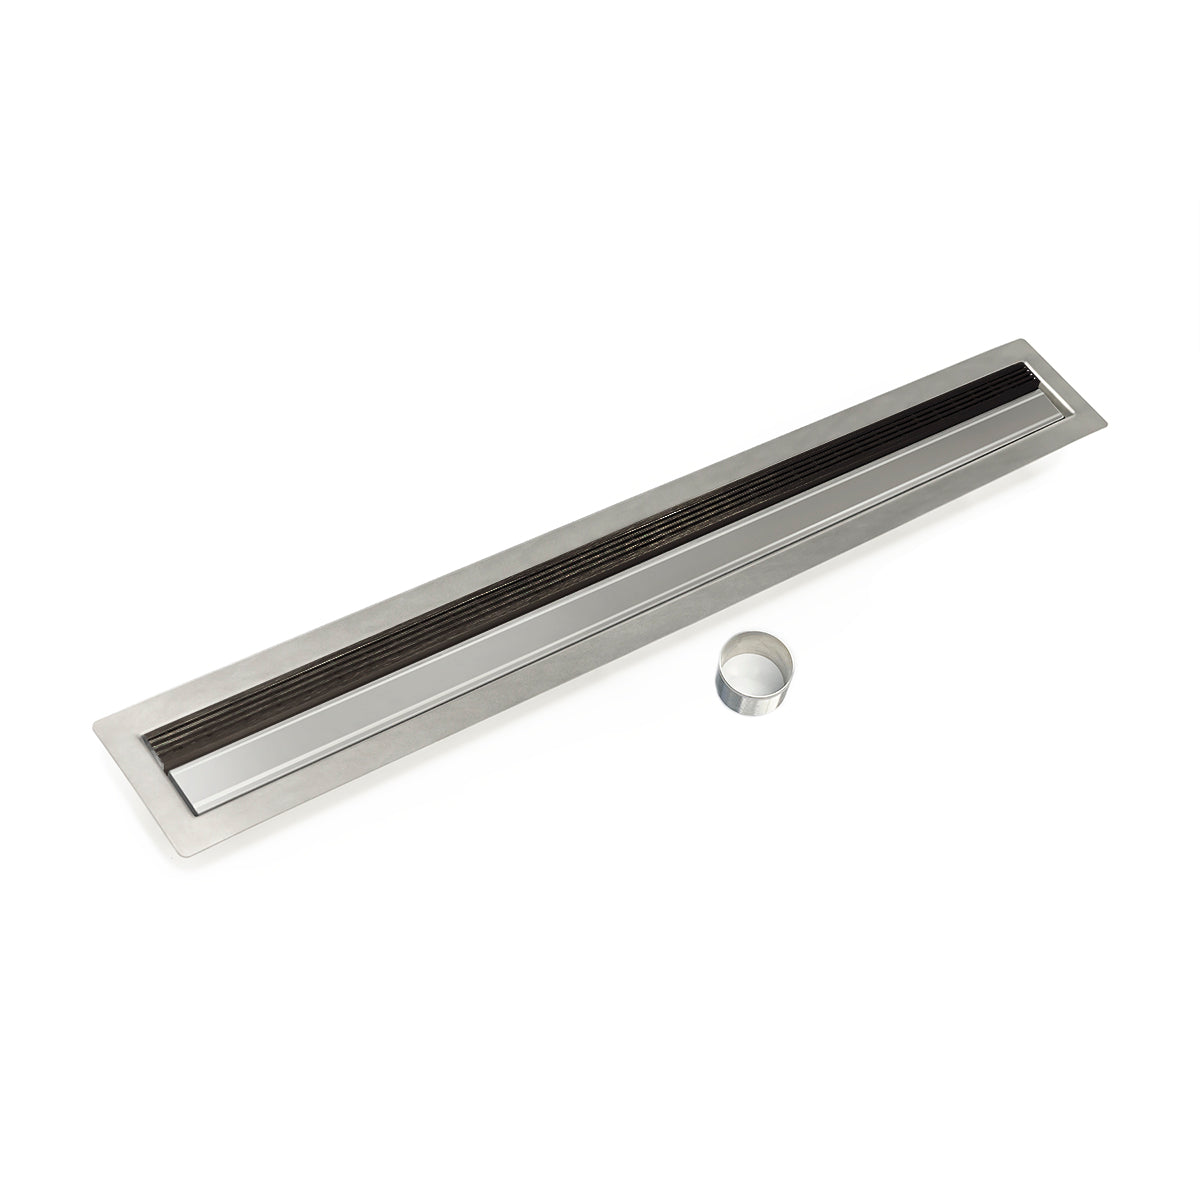 Infinity Drain 60" FCB Series Double Waterproofing Linear Drain Kit with 1" Wedge Wire Grate